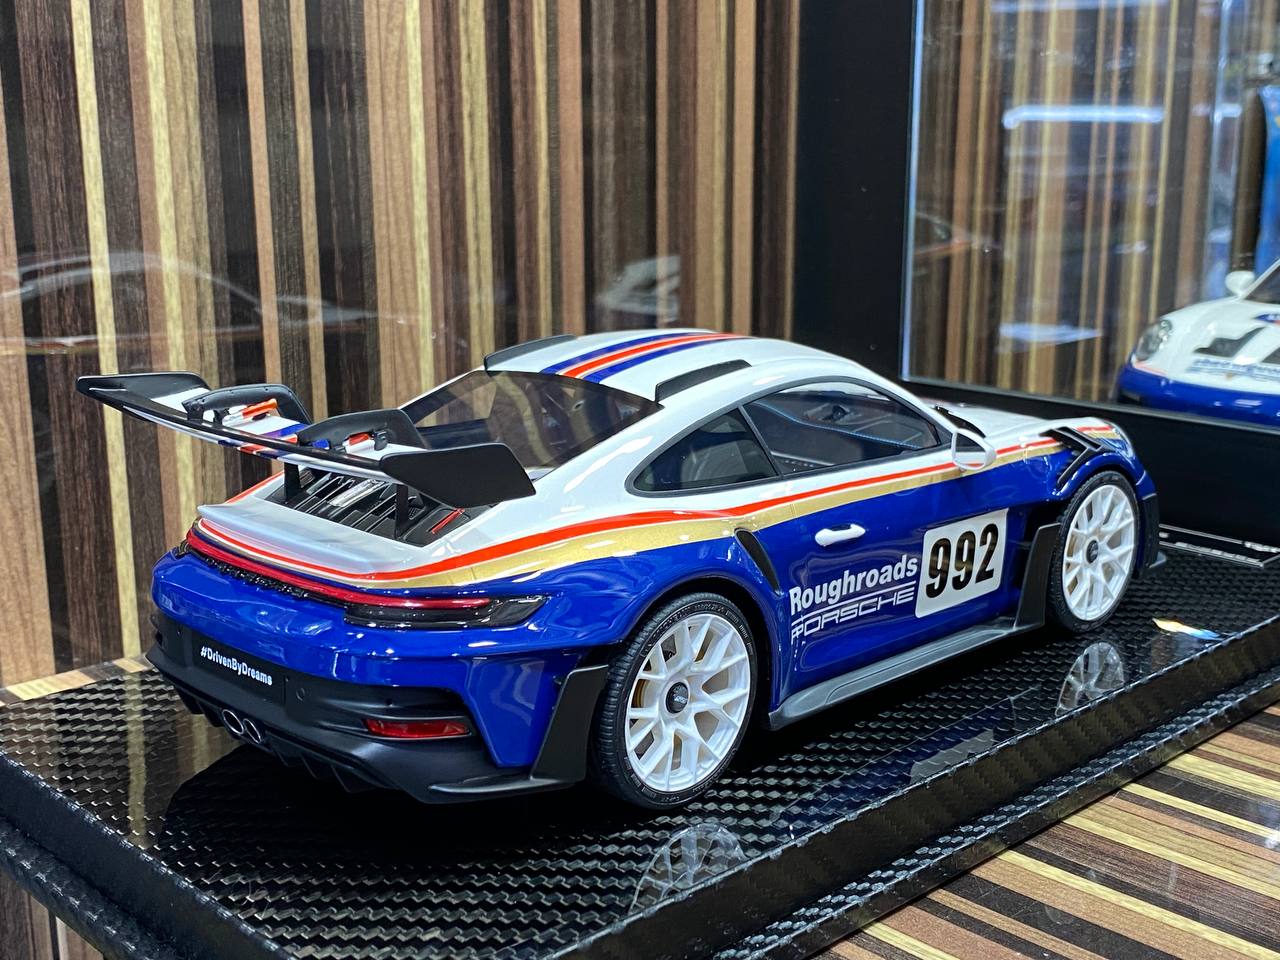 1/18 VIP Models Resin Model - Porsche 911 GT3 RS with Rothmans Decals, Limited Edition|Sold in Dturman.com Dubai UAE.